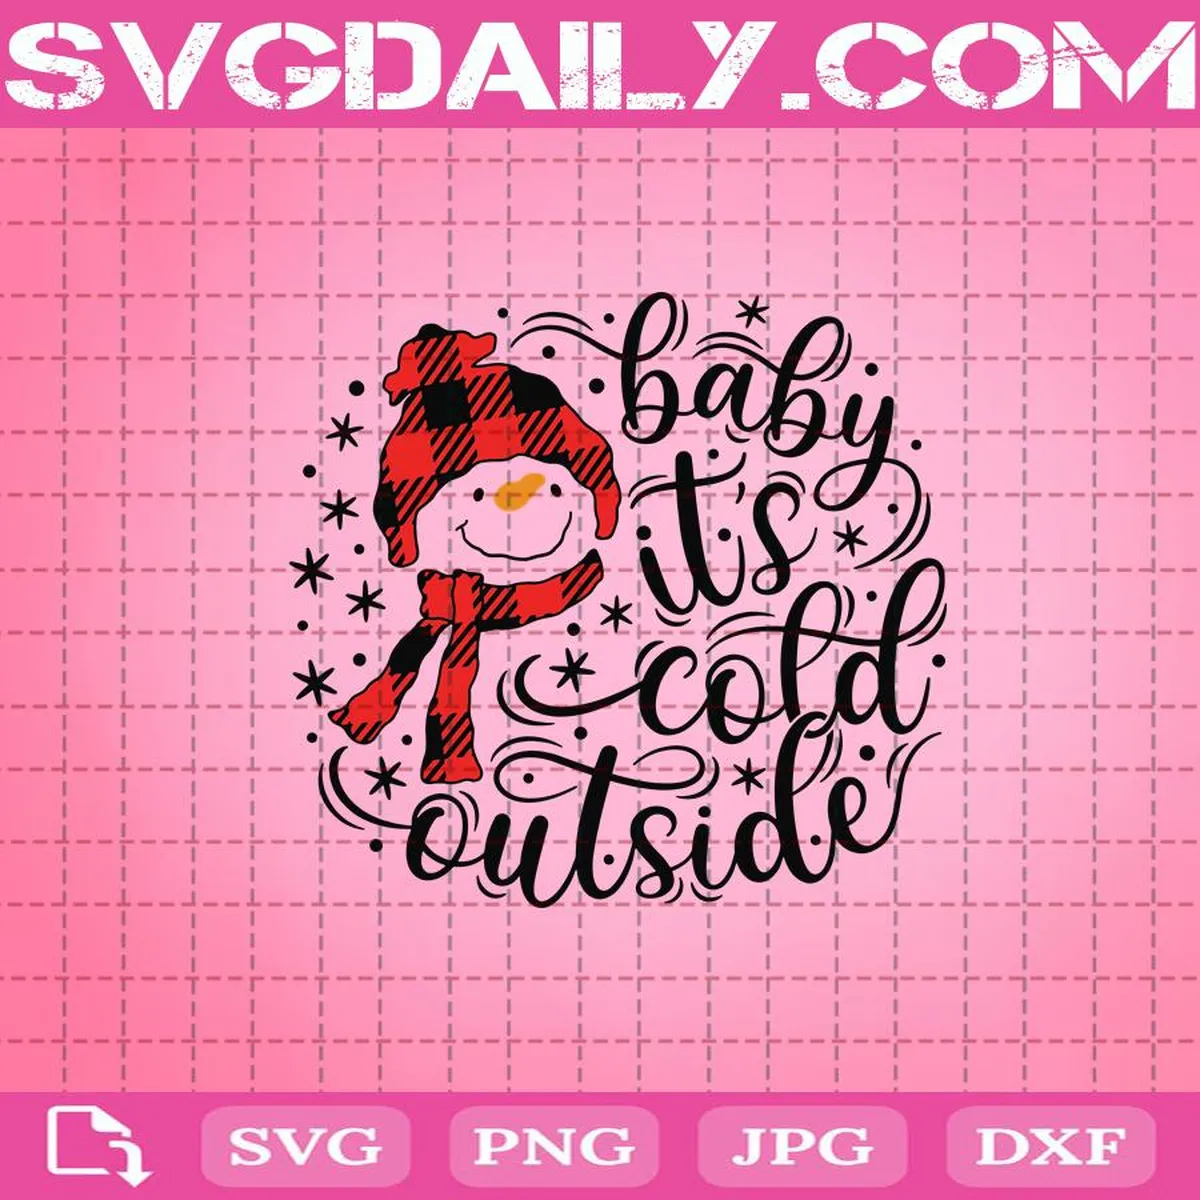 Baby It's Cold Outside Svg, Christmas Svg, Snowman Svg, Buffalo Plaid Svg, Christmas Svg Png Dxf Eps Download Files